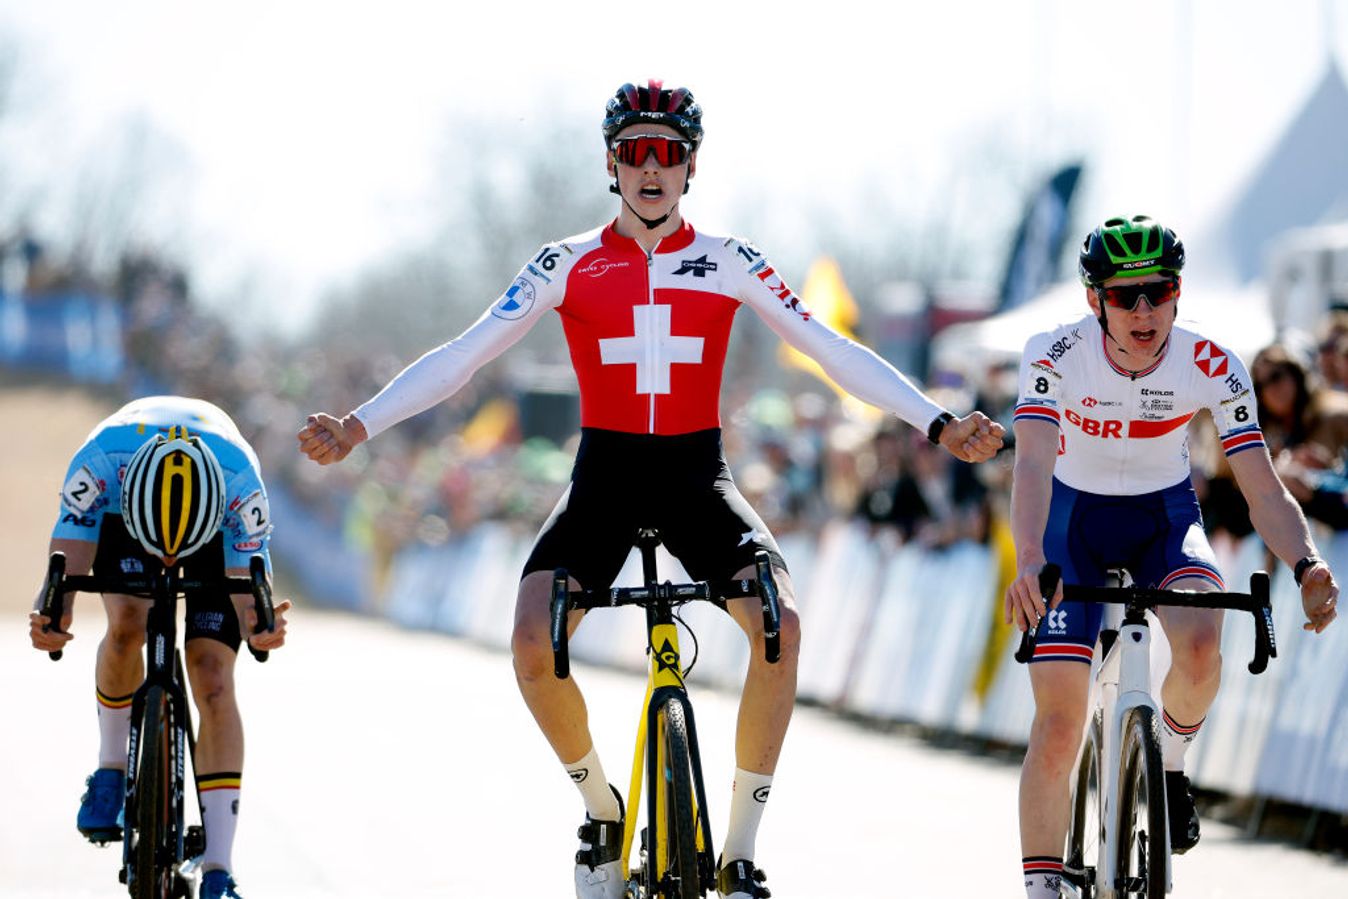 Christen won the junior men's title at the 2022 Cyclo-cross World Championships 